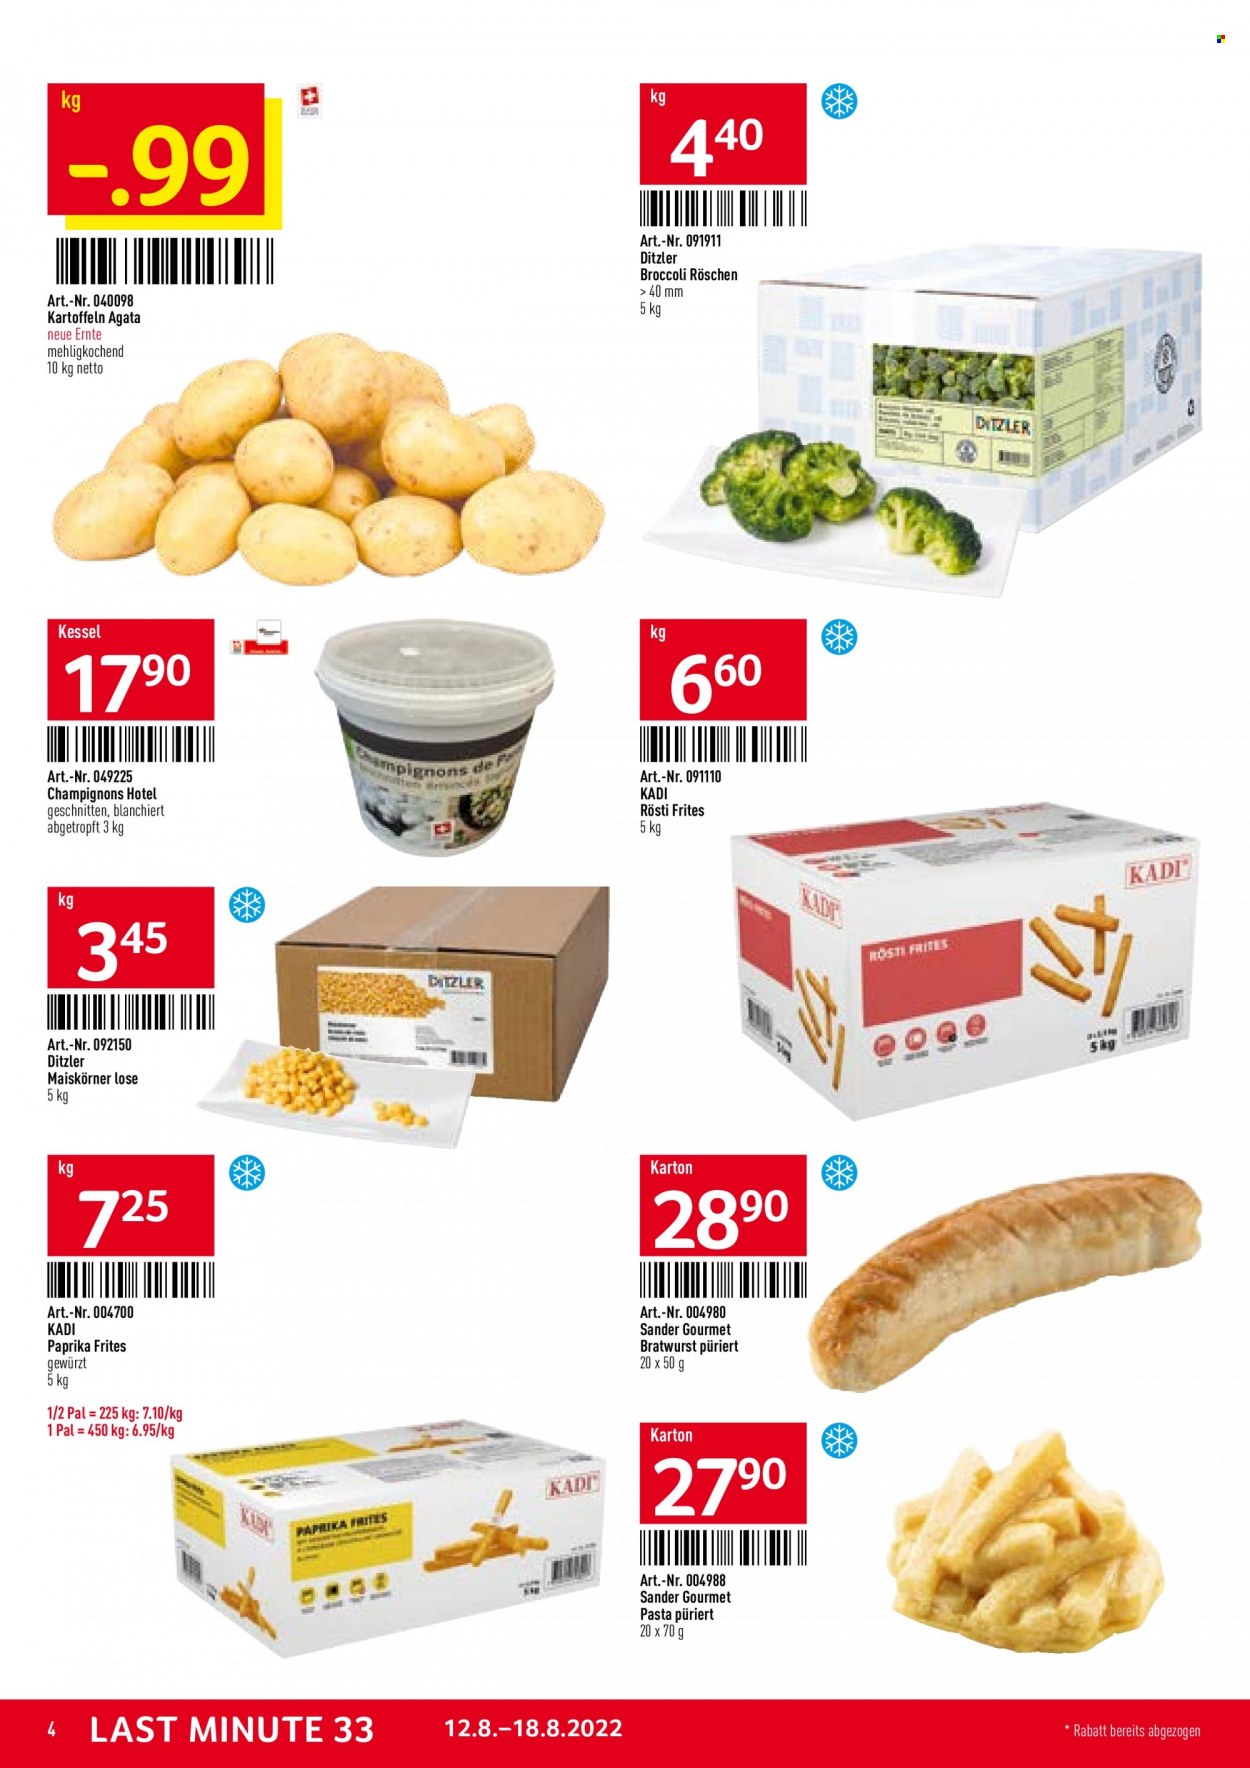 Catalogue TransGourmet - 12.8.2022 - 18.8.2022. Page 4.